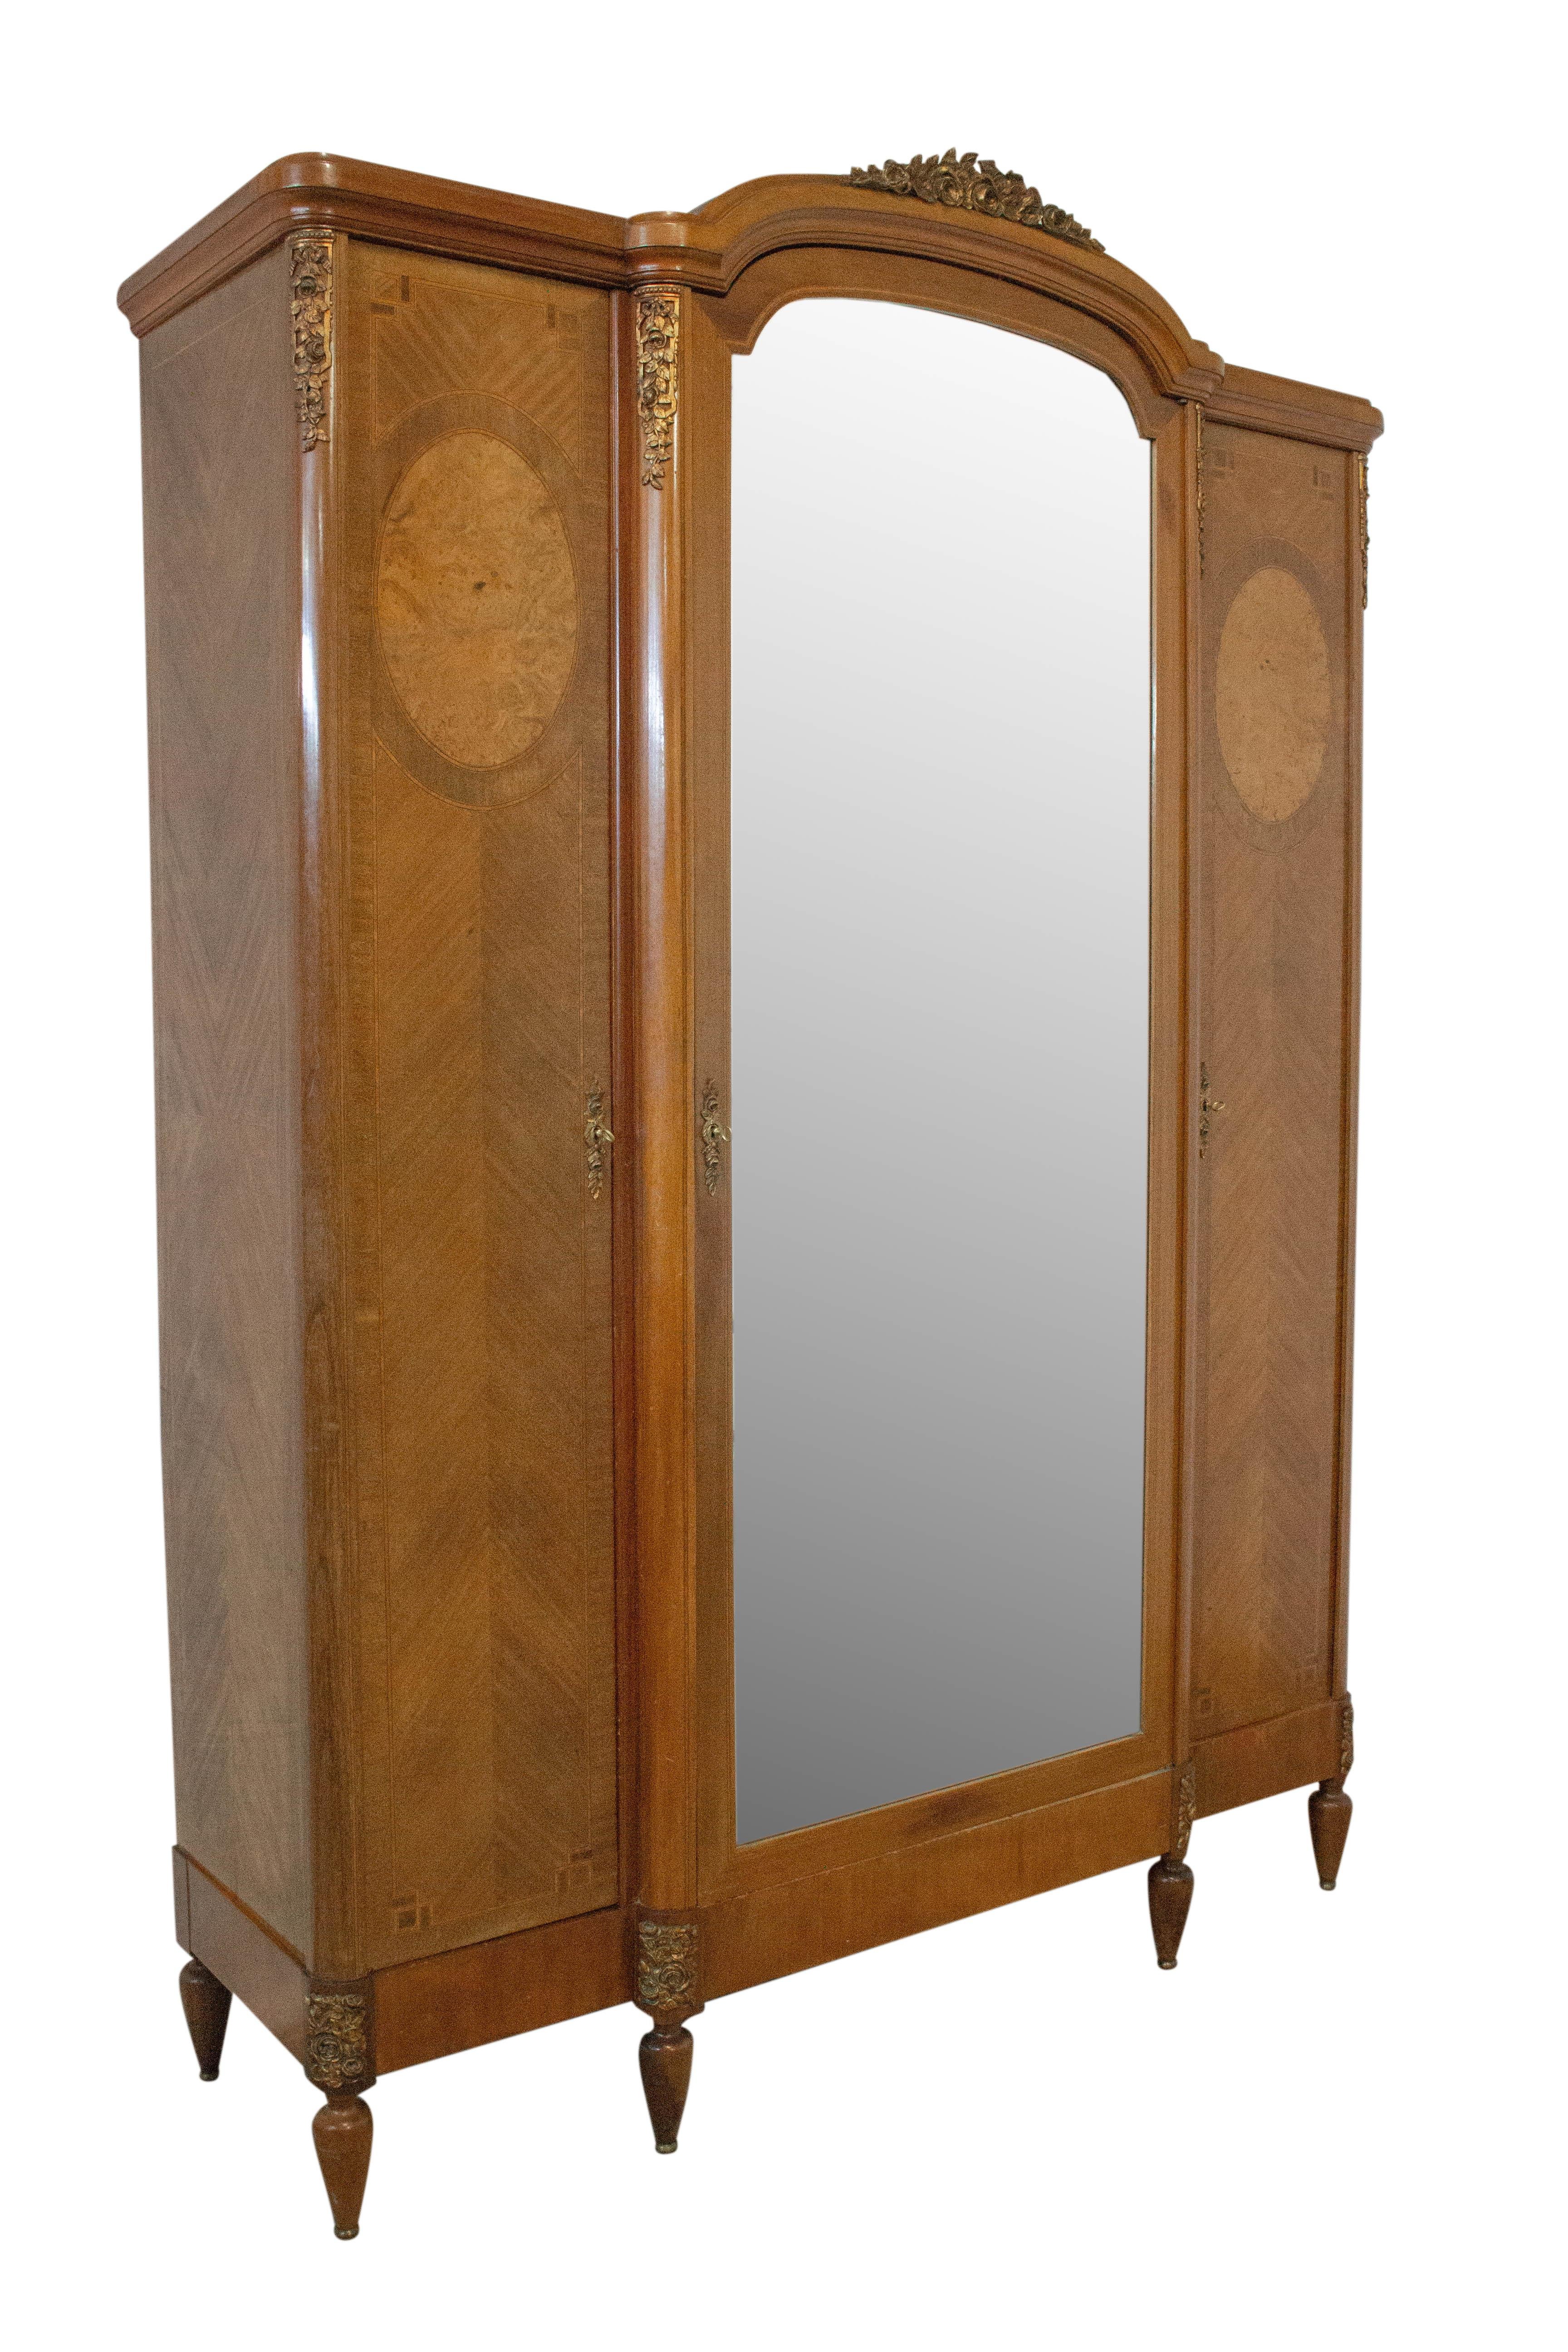 French mirror door wardrobe 1900 Louis XVI style, blond exotic wood and elm burl armoire
Marquetry work and bronze roses.
Cabinet with two drawers and three doors.
Few marks on the bottom of the armoire, please see photos.
In good antique condition